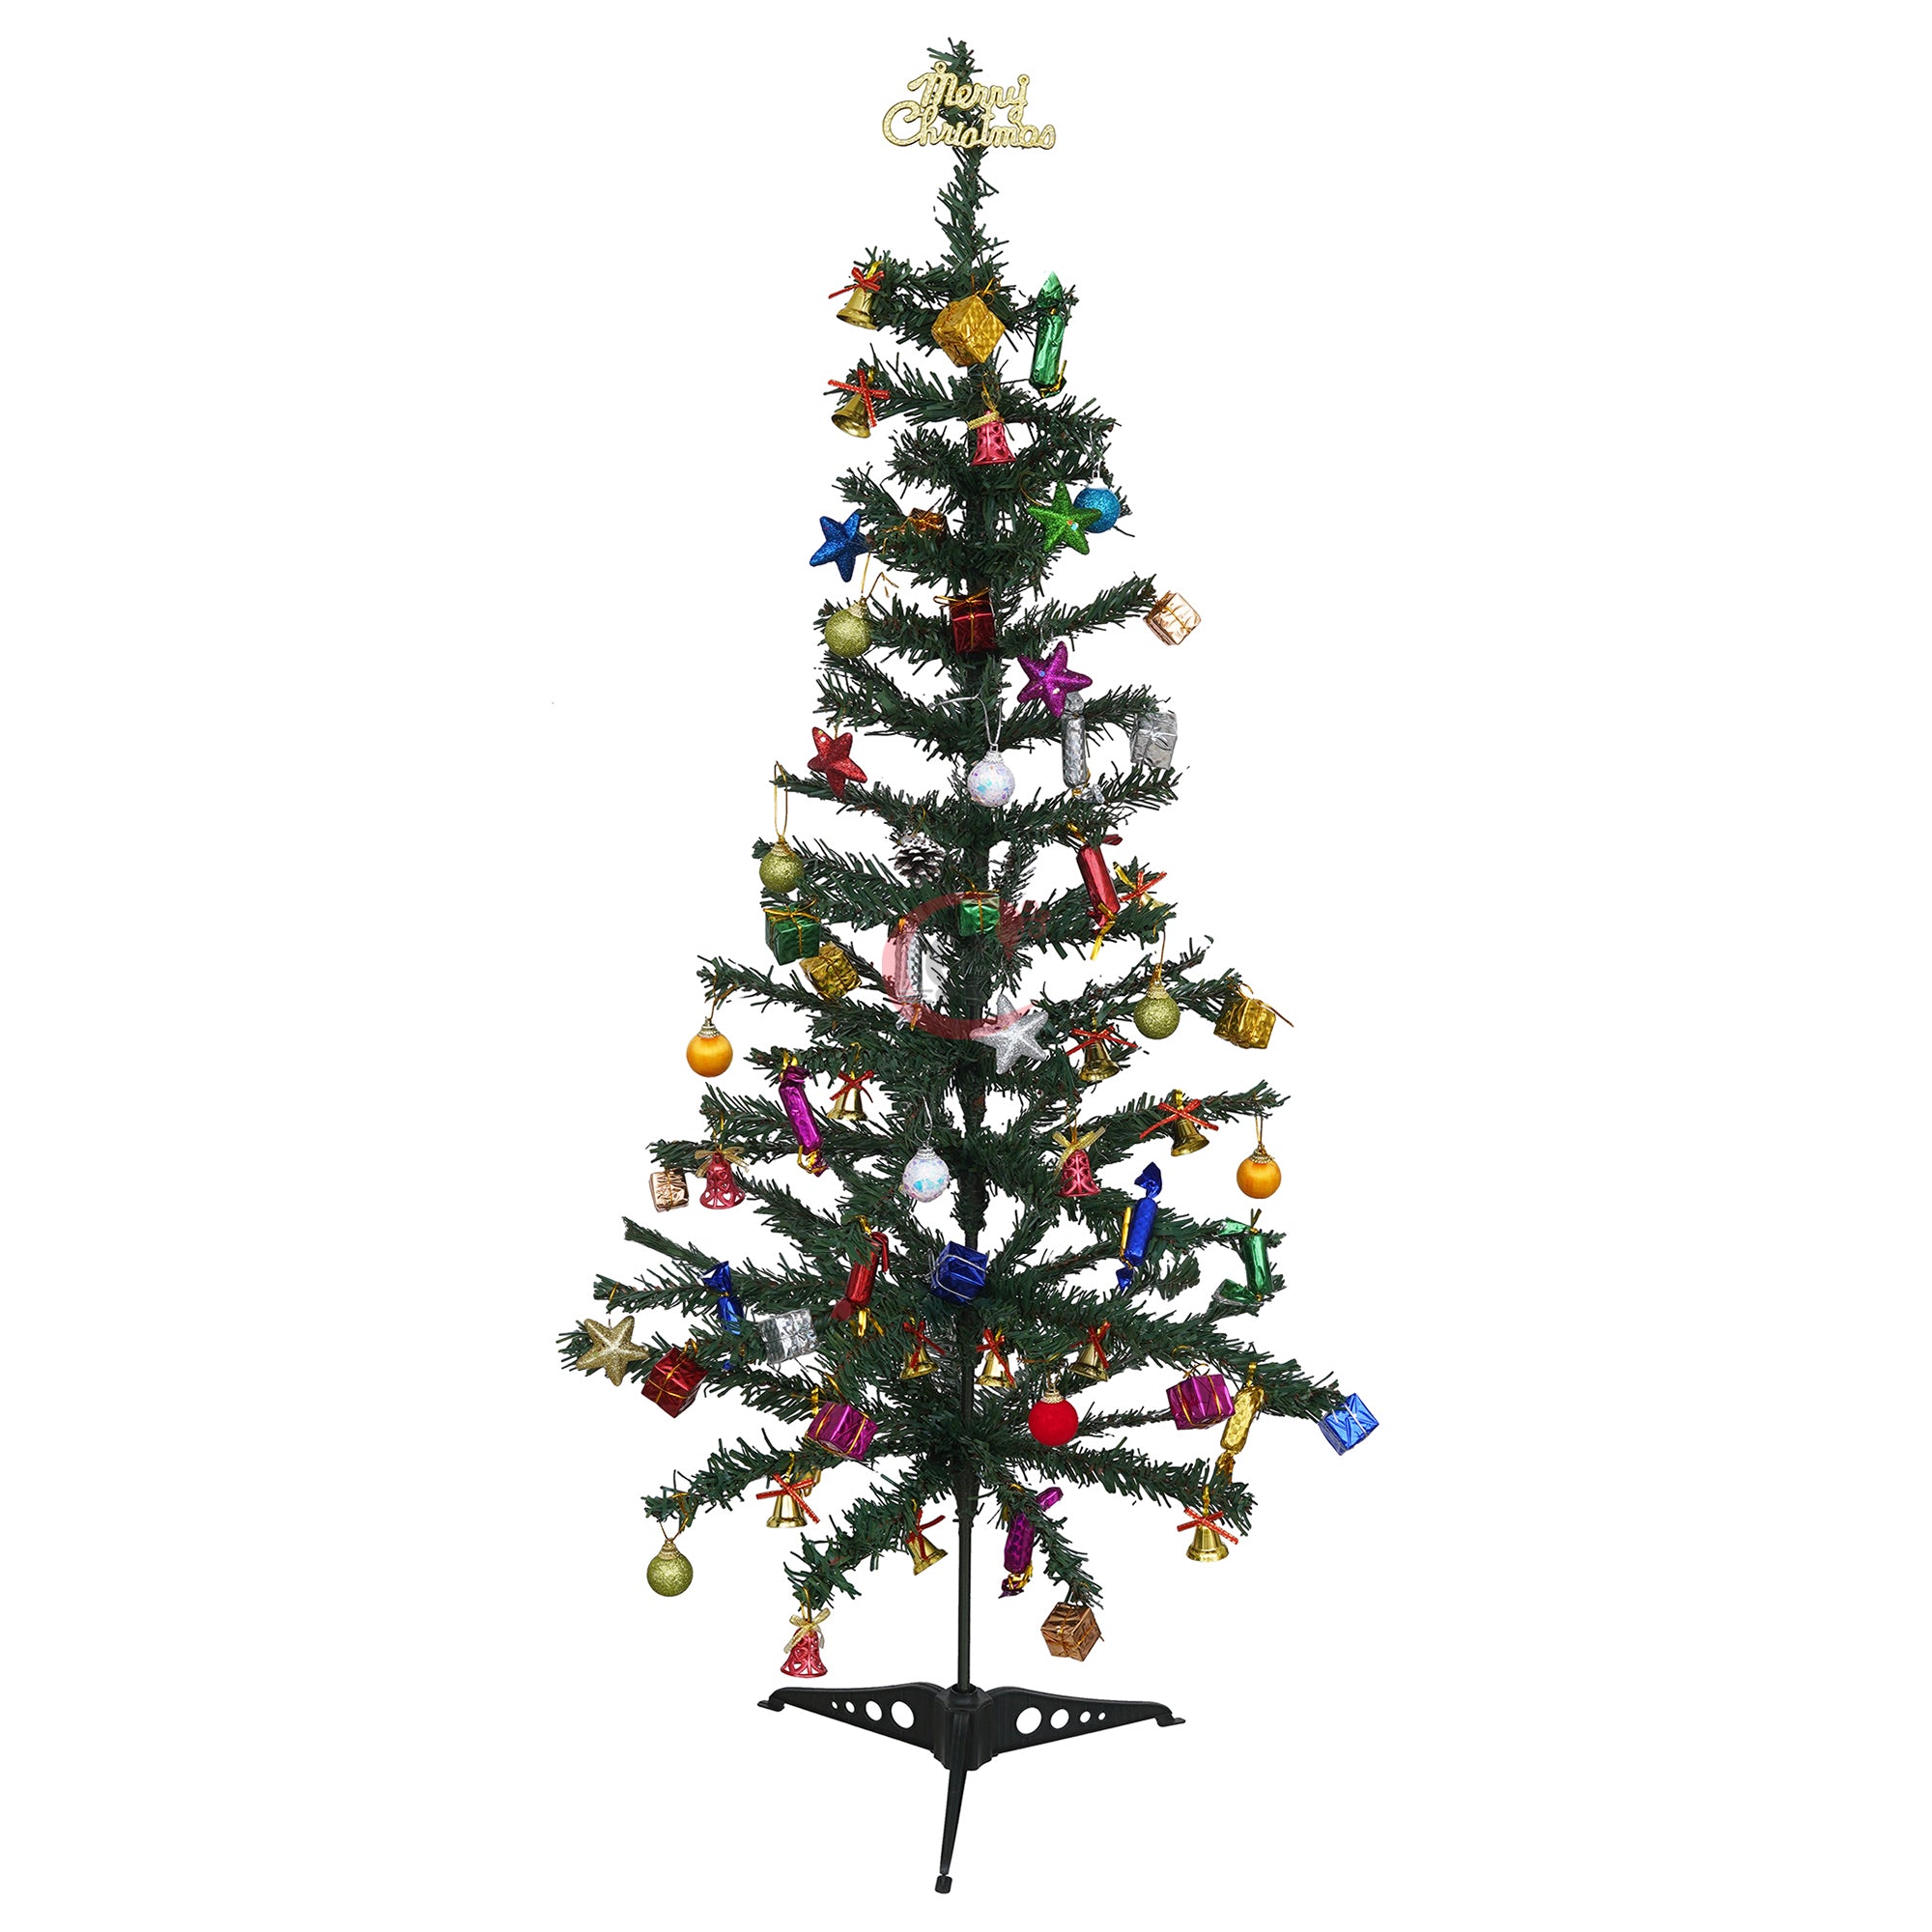 eCraftIndia 3 Feet Green Artificial Christmas Tree Xmas Pine Tree with Metal Stand - Xmas Tree for Indoor, Outdoor, Home, Living Room, Office, Church Decor - Merry Christmas Decoration Item 6